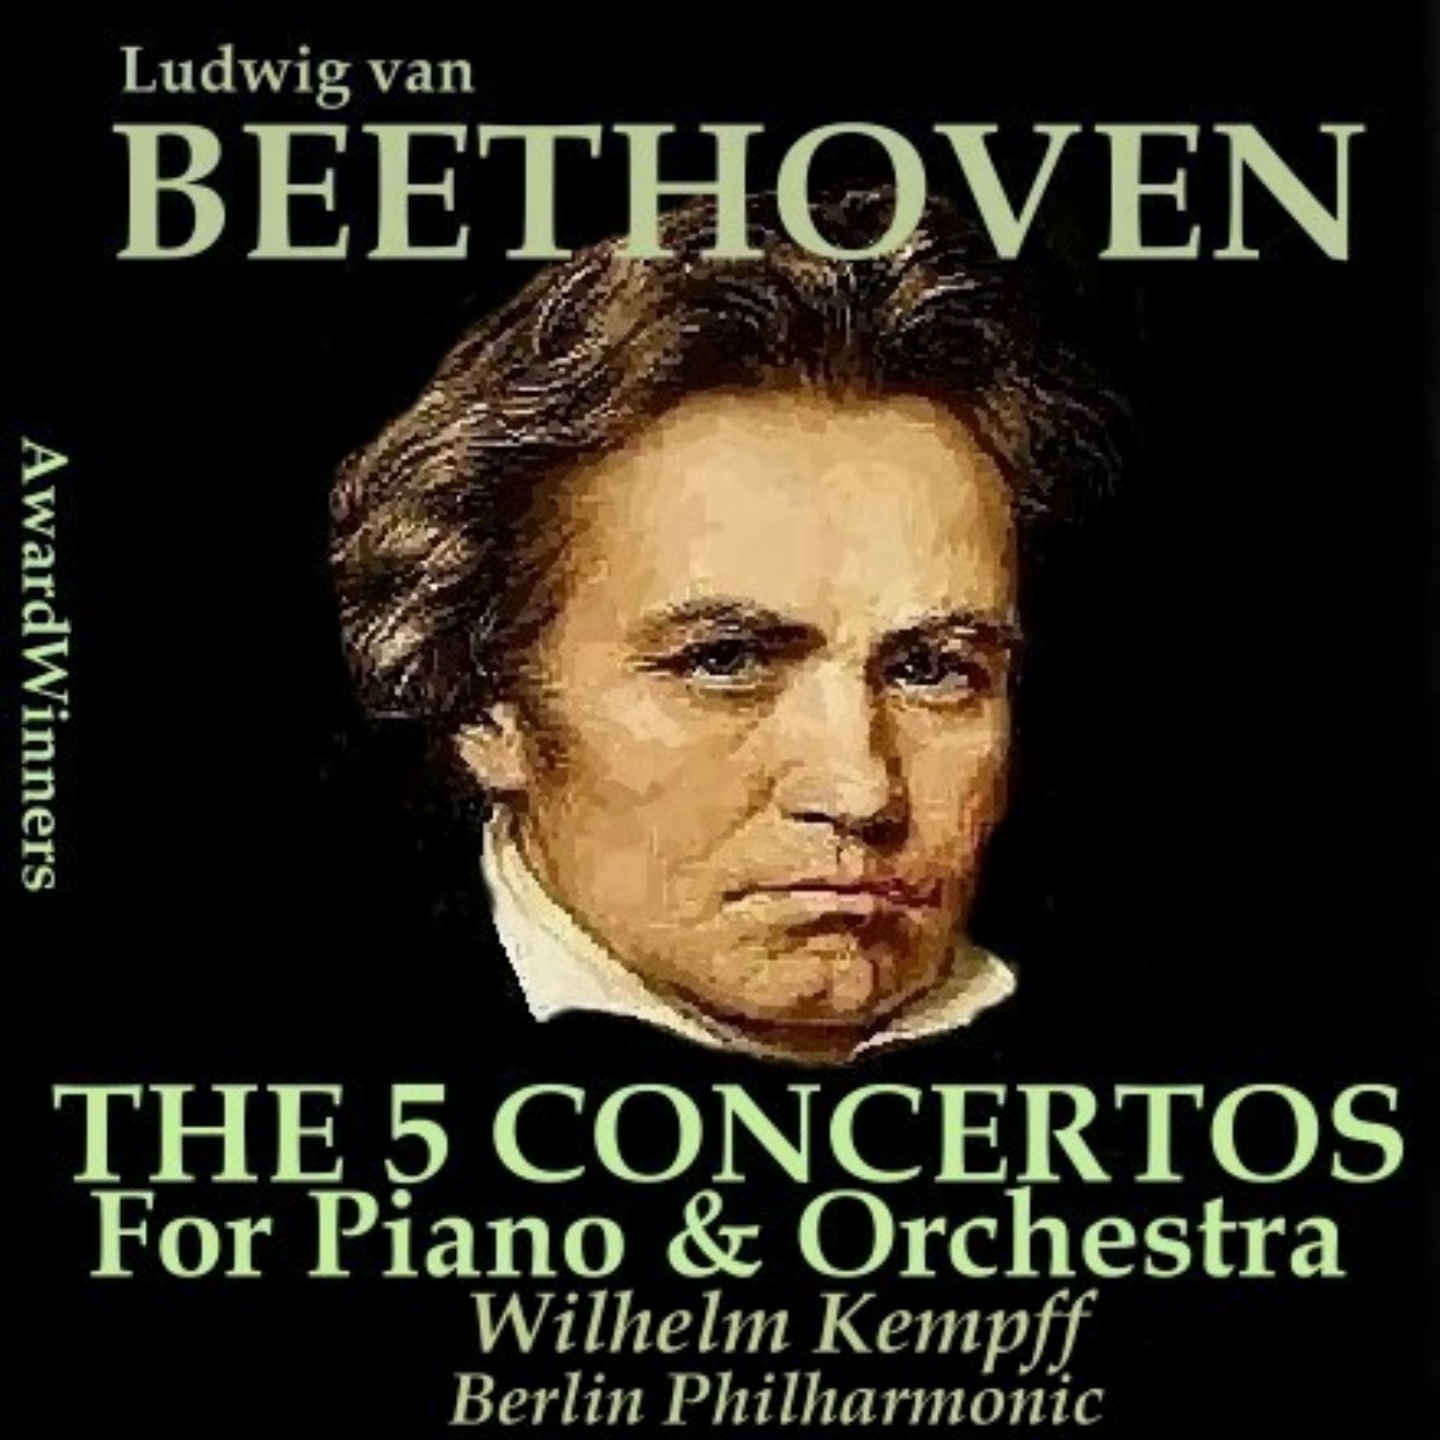 Beethoven, Vol. 13 - The 5 Concertos for Piano & Orchestra